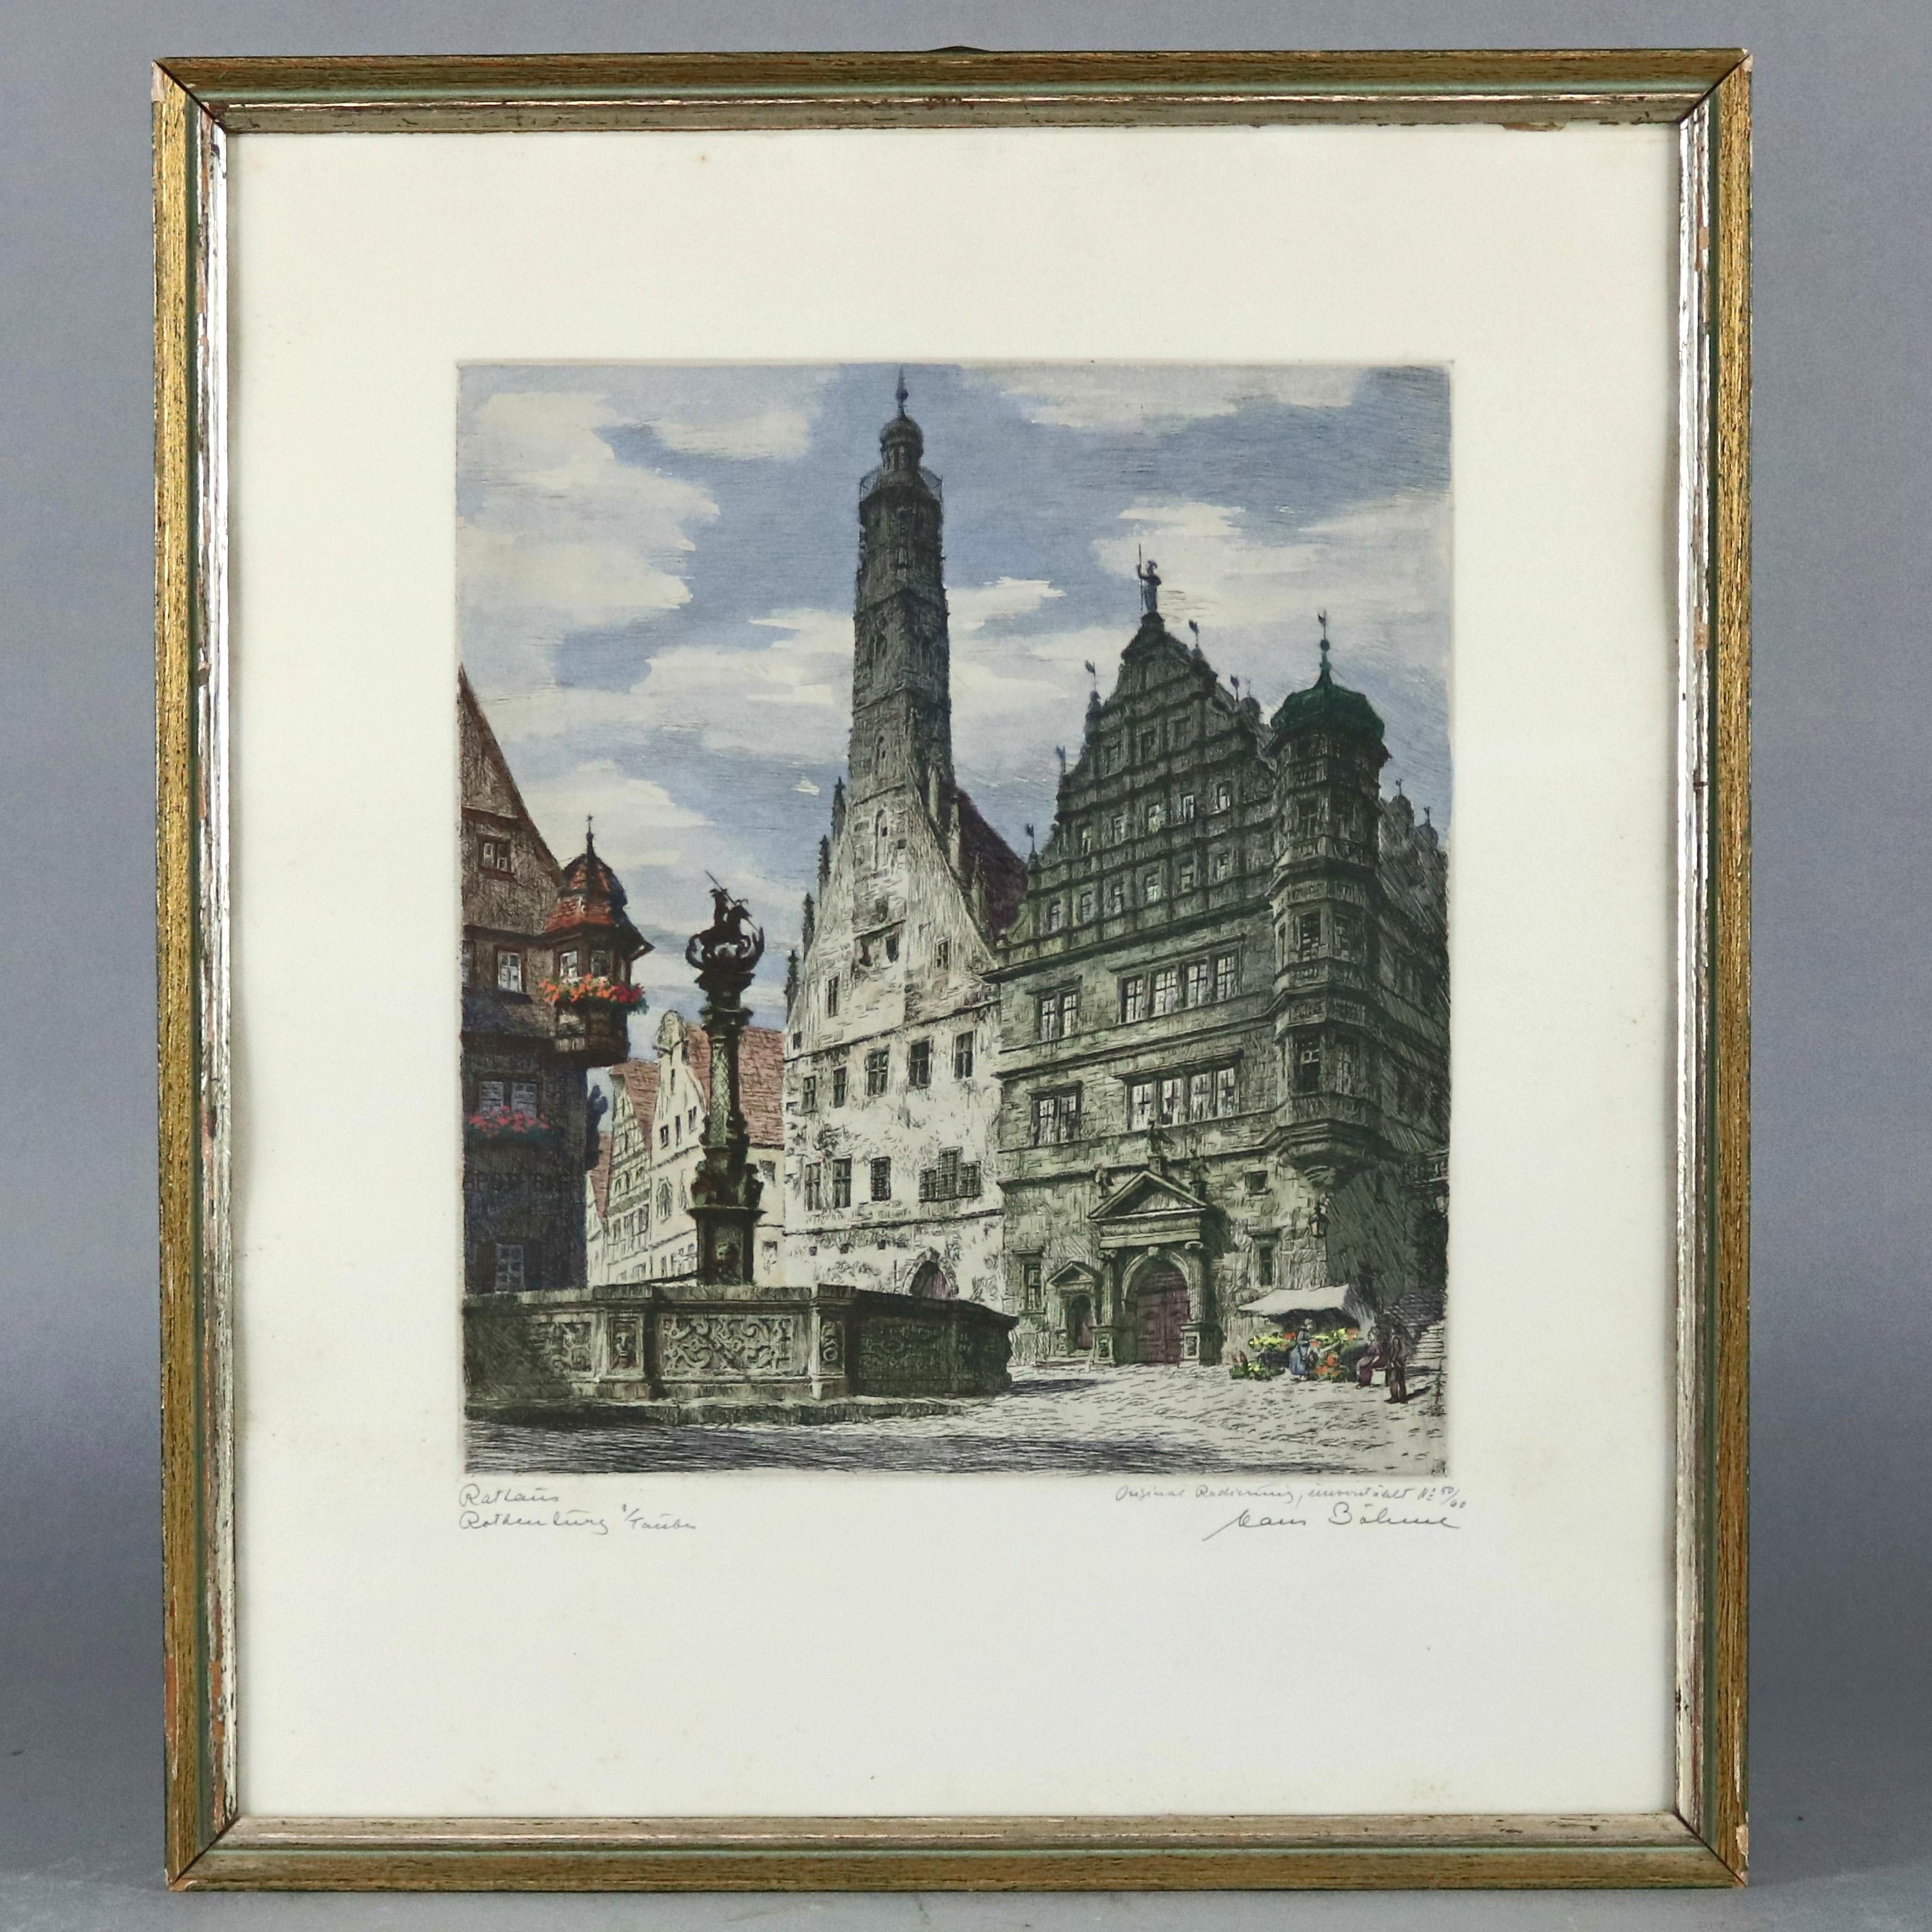 A pair of antique Bavarian etchings depict street scenes of Rothenburg, pencil titled lower right and signed lower left, framed, circa 1900

Measures - 21.5